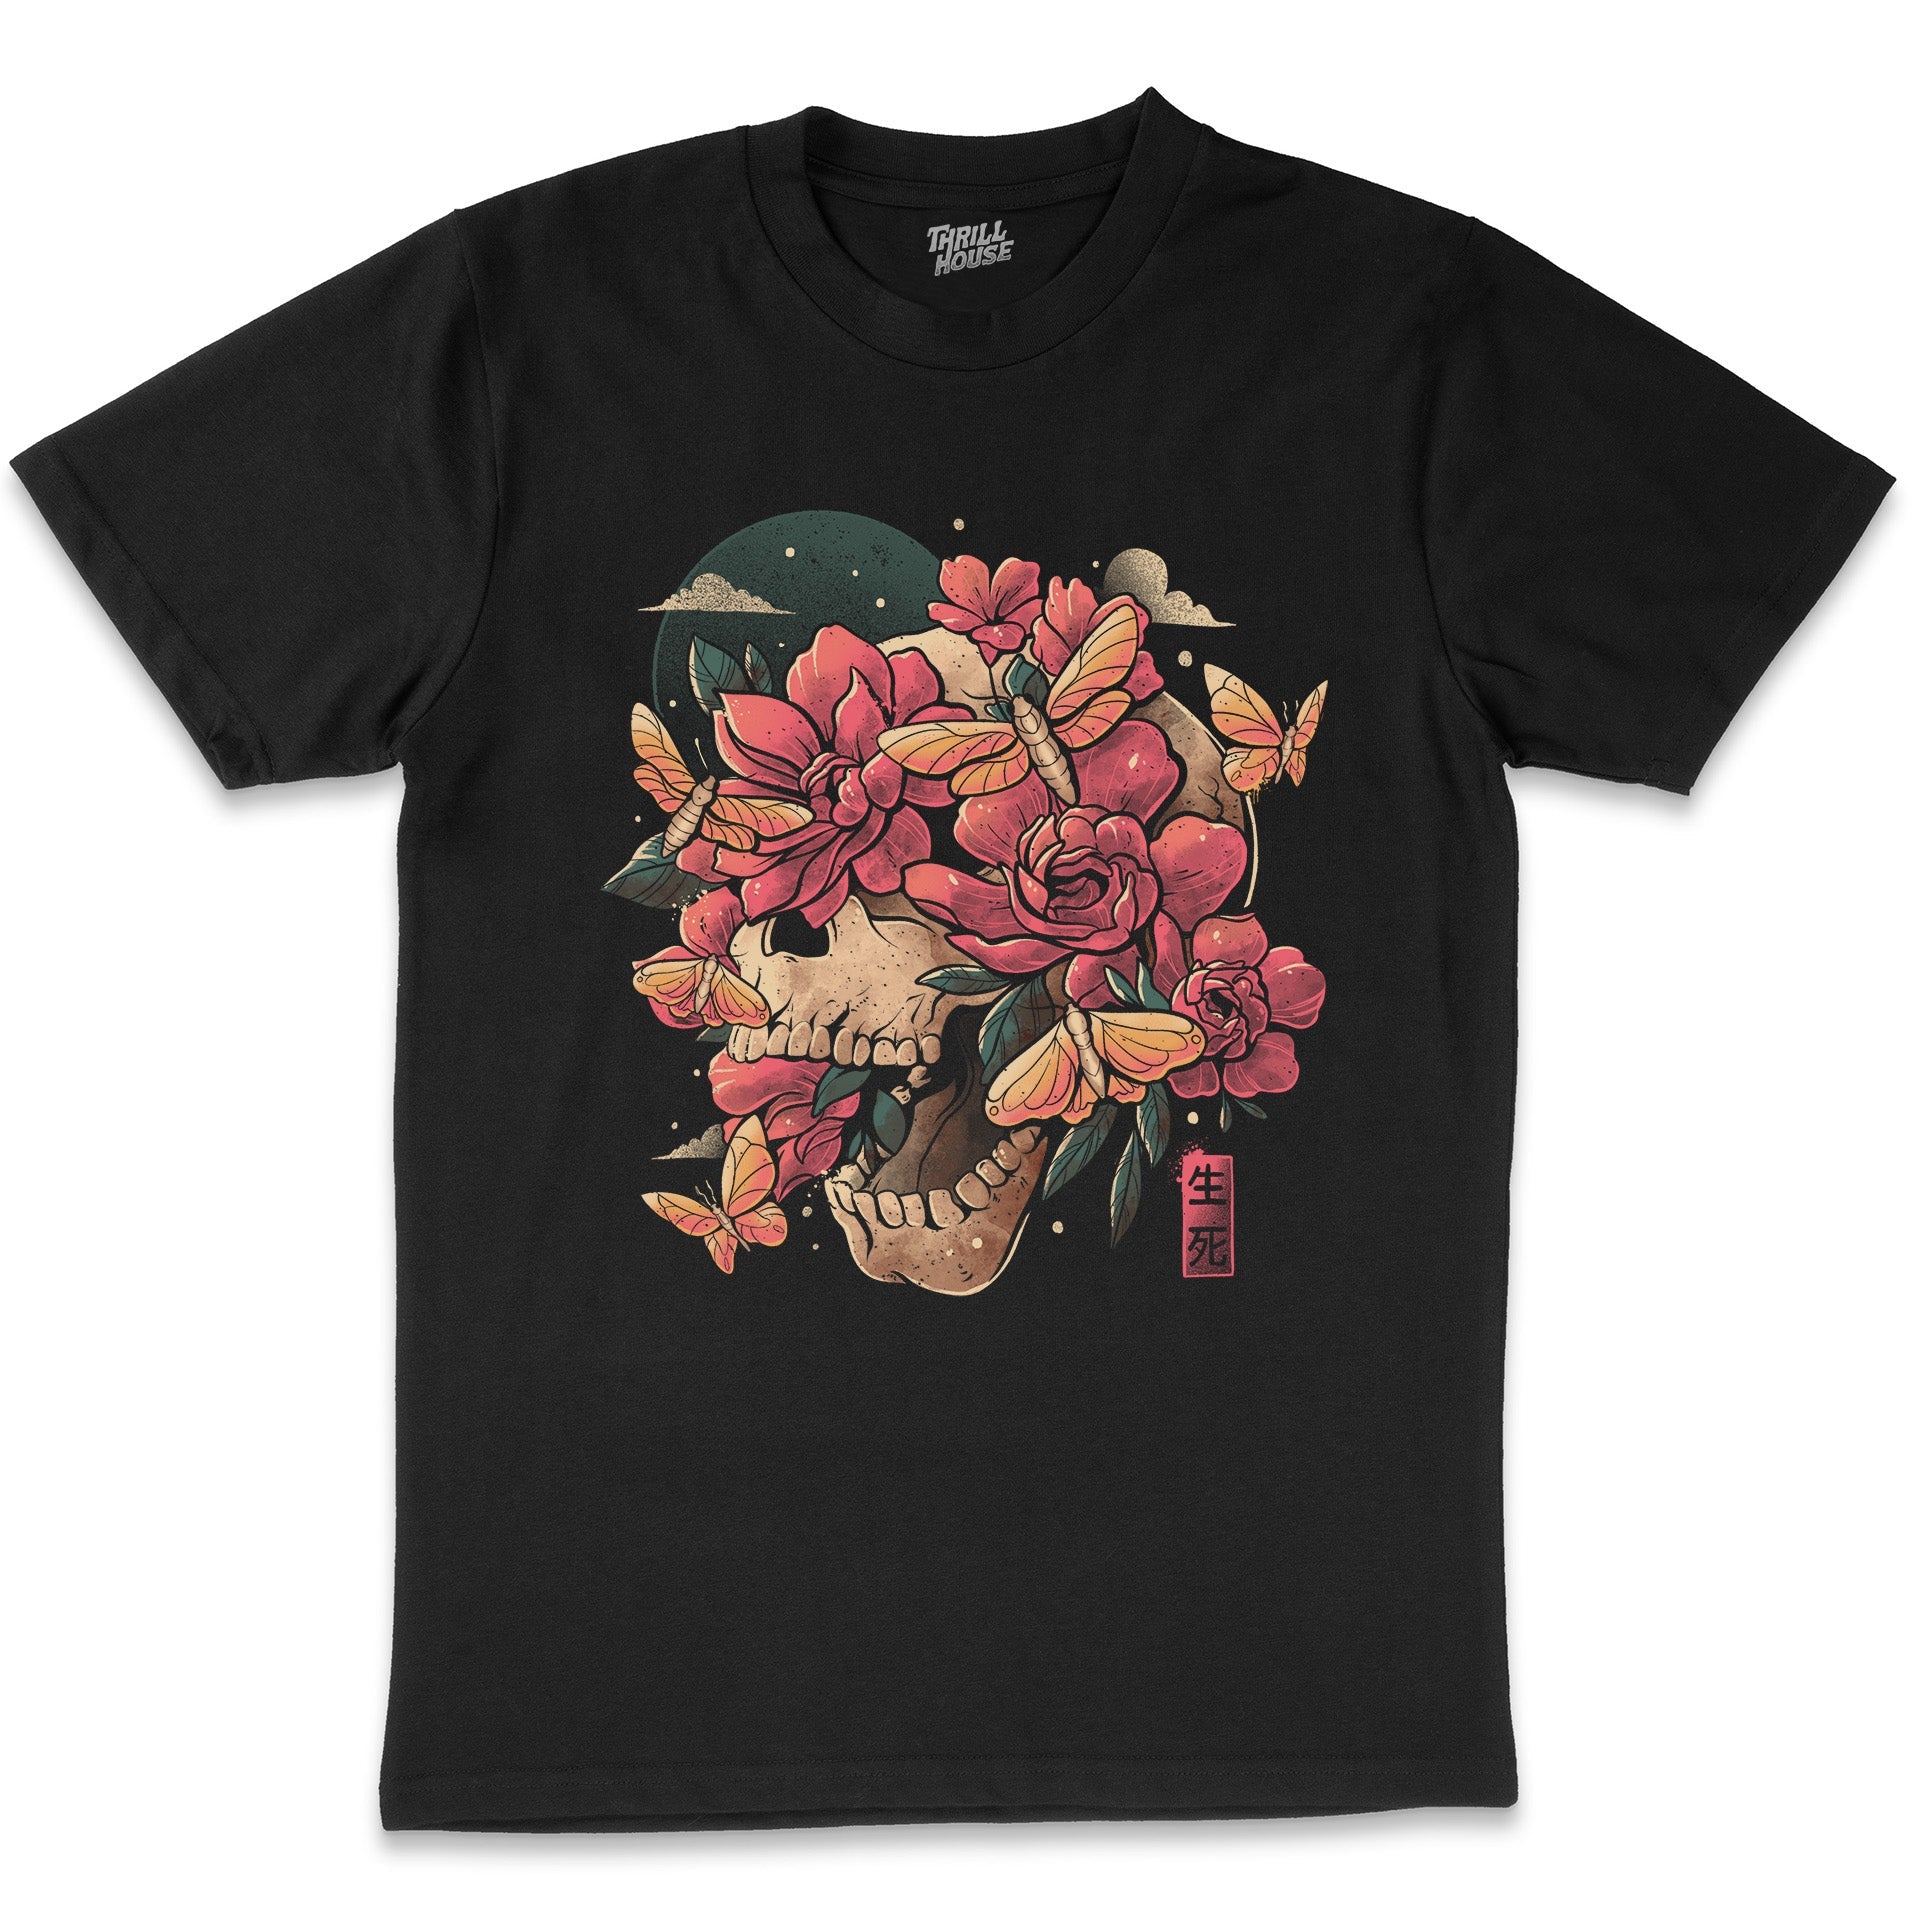 Blossom in Grave Cook Skull Flowers Artistic Japanese Artsy Tattoo Dark Macabre Cotton T-Shirt